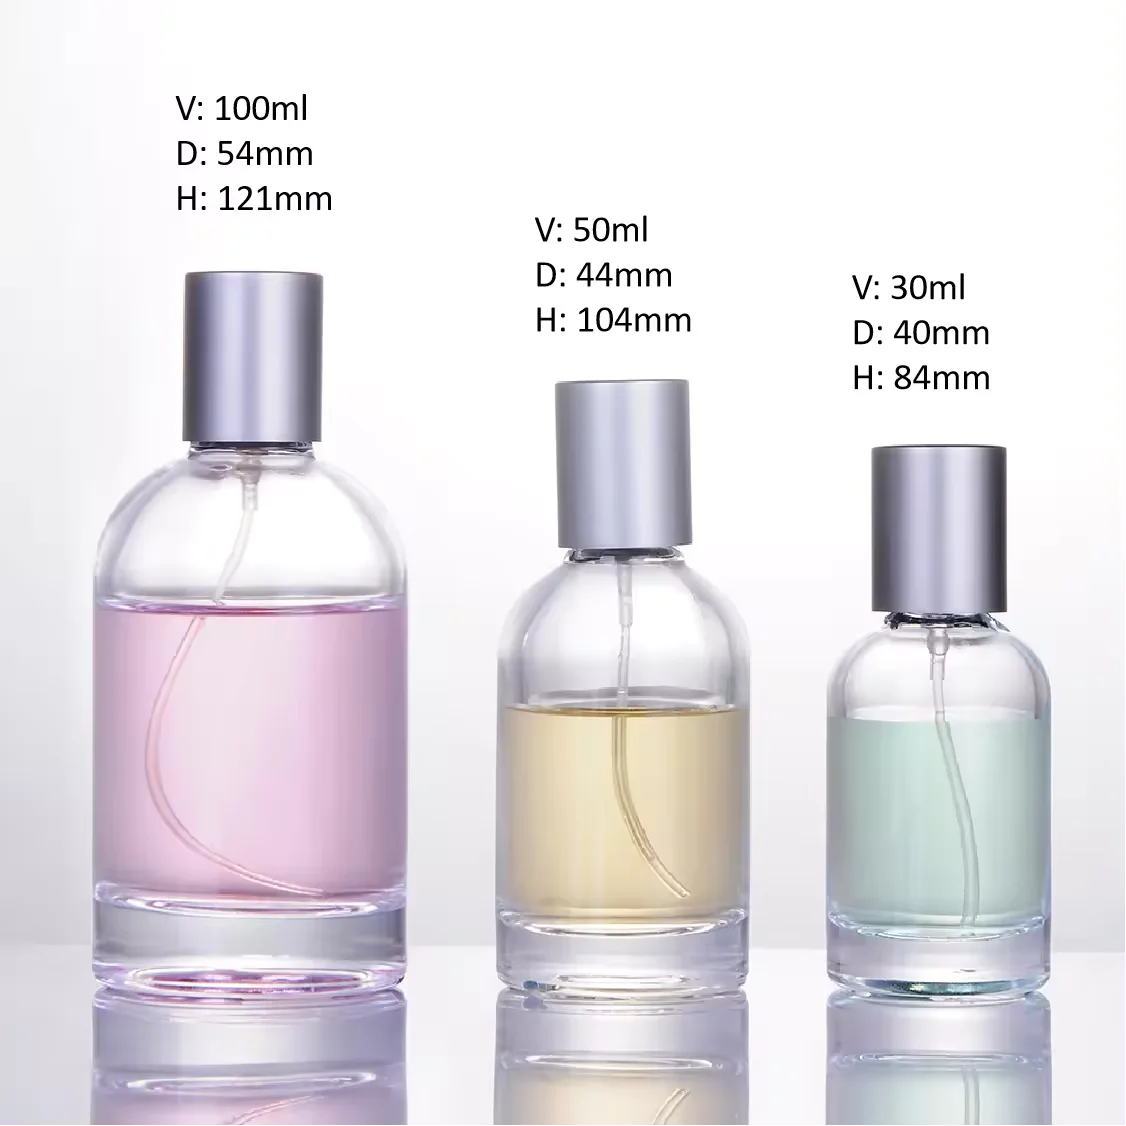 Dimensions and capacity information for 3 sizes of cylindrical perfume bottles